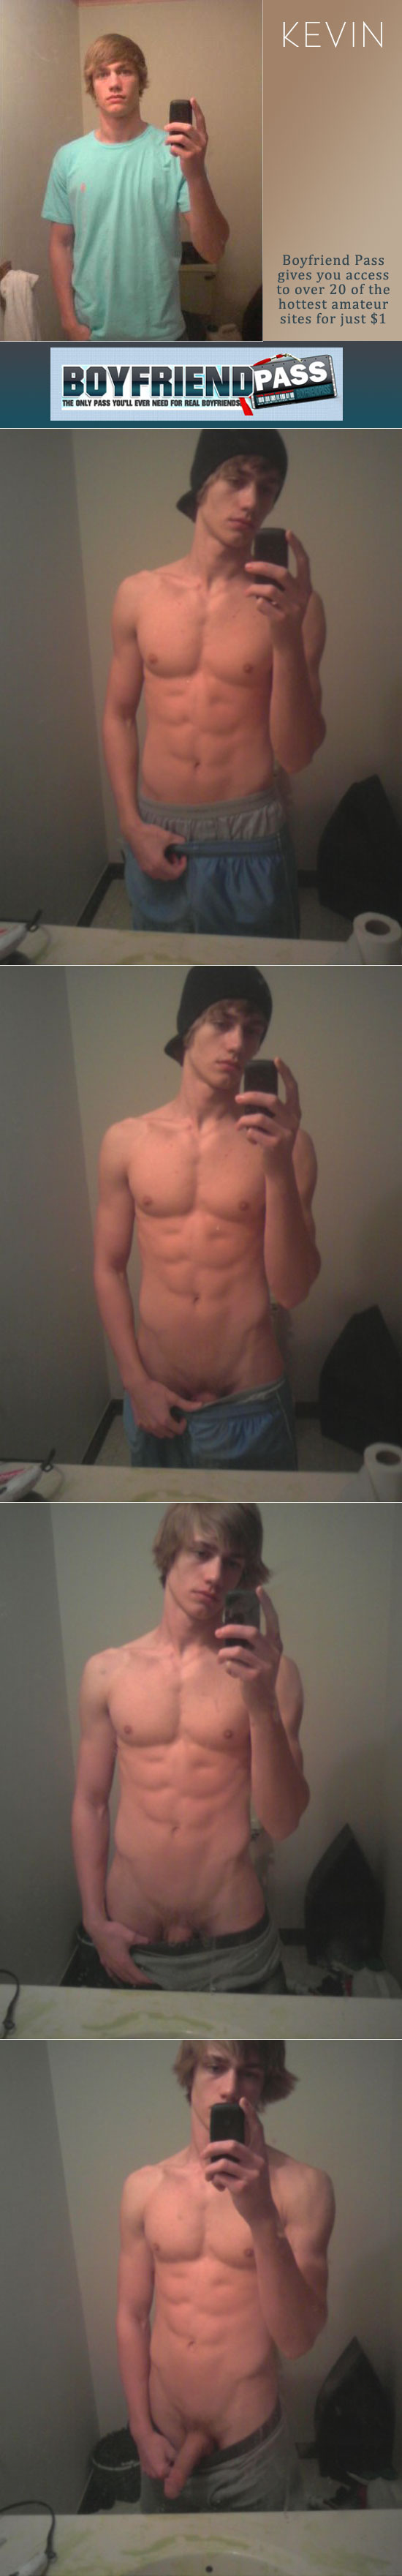 The mirror pics of a hot amateur guy